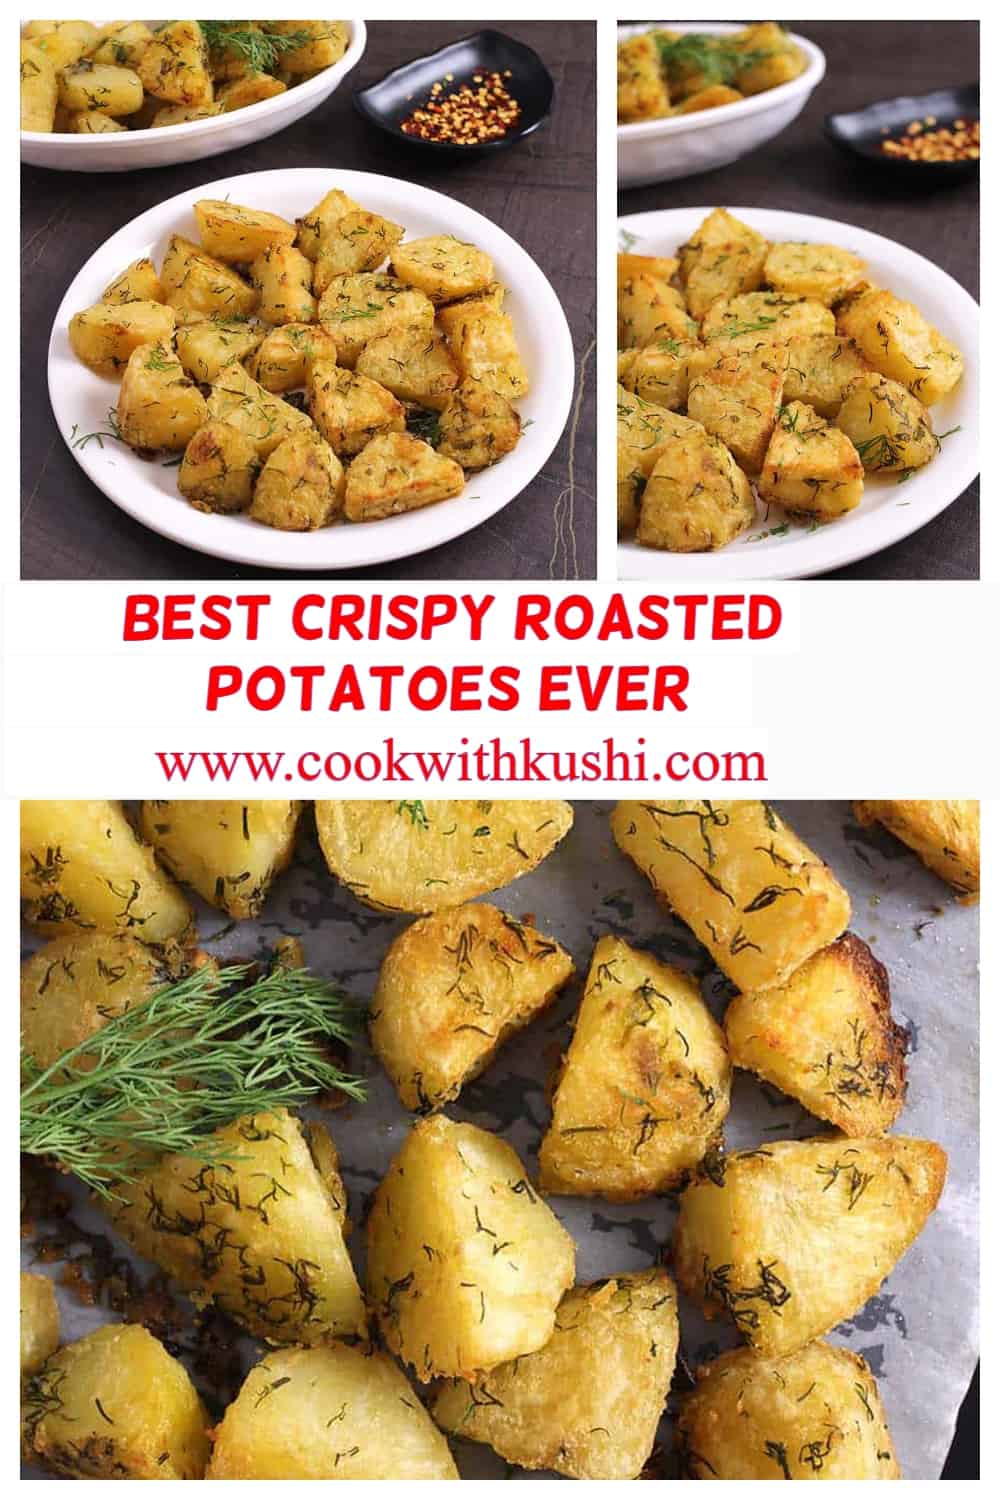 Collage of shots showing roasted garlic herb potatoes. These garlic roasted potatoes are crisp on the outside, fluffy and creamy on the inside, and super easy to prepare. Therefore these roasted potatoes are a perfect side dish or appetizer for any meal. #Potatosidedish #crispypotatoes #roastedpotatoes #bakedpotatoes #ovenroasted #panroasted #grilled #airfryer #instantpot #microwave #potatorecipes #dill #rosemary #garlic #herb #idaho #russet #yukongold